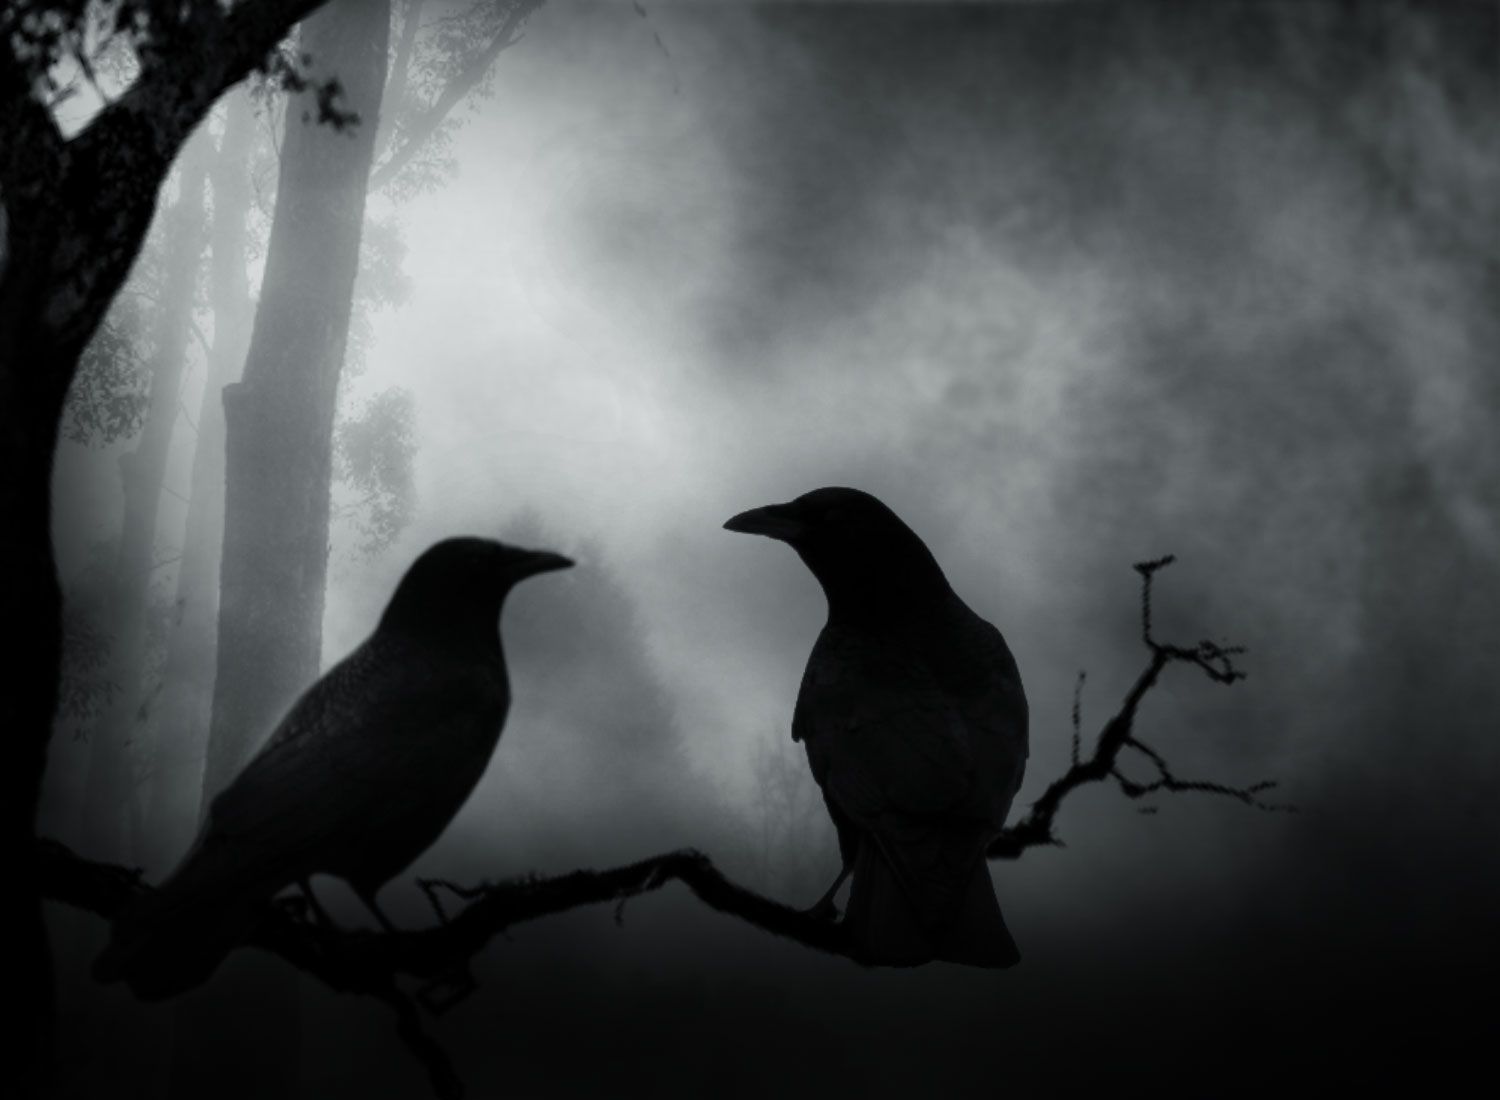 Crows Wallpapers